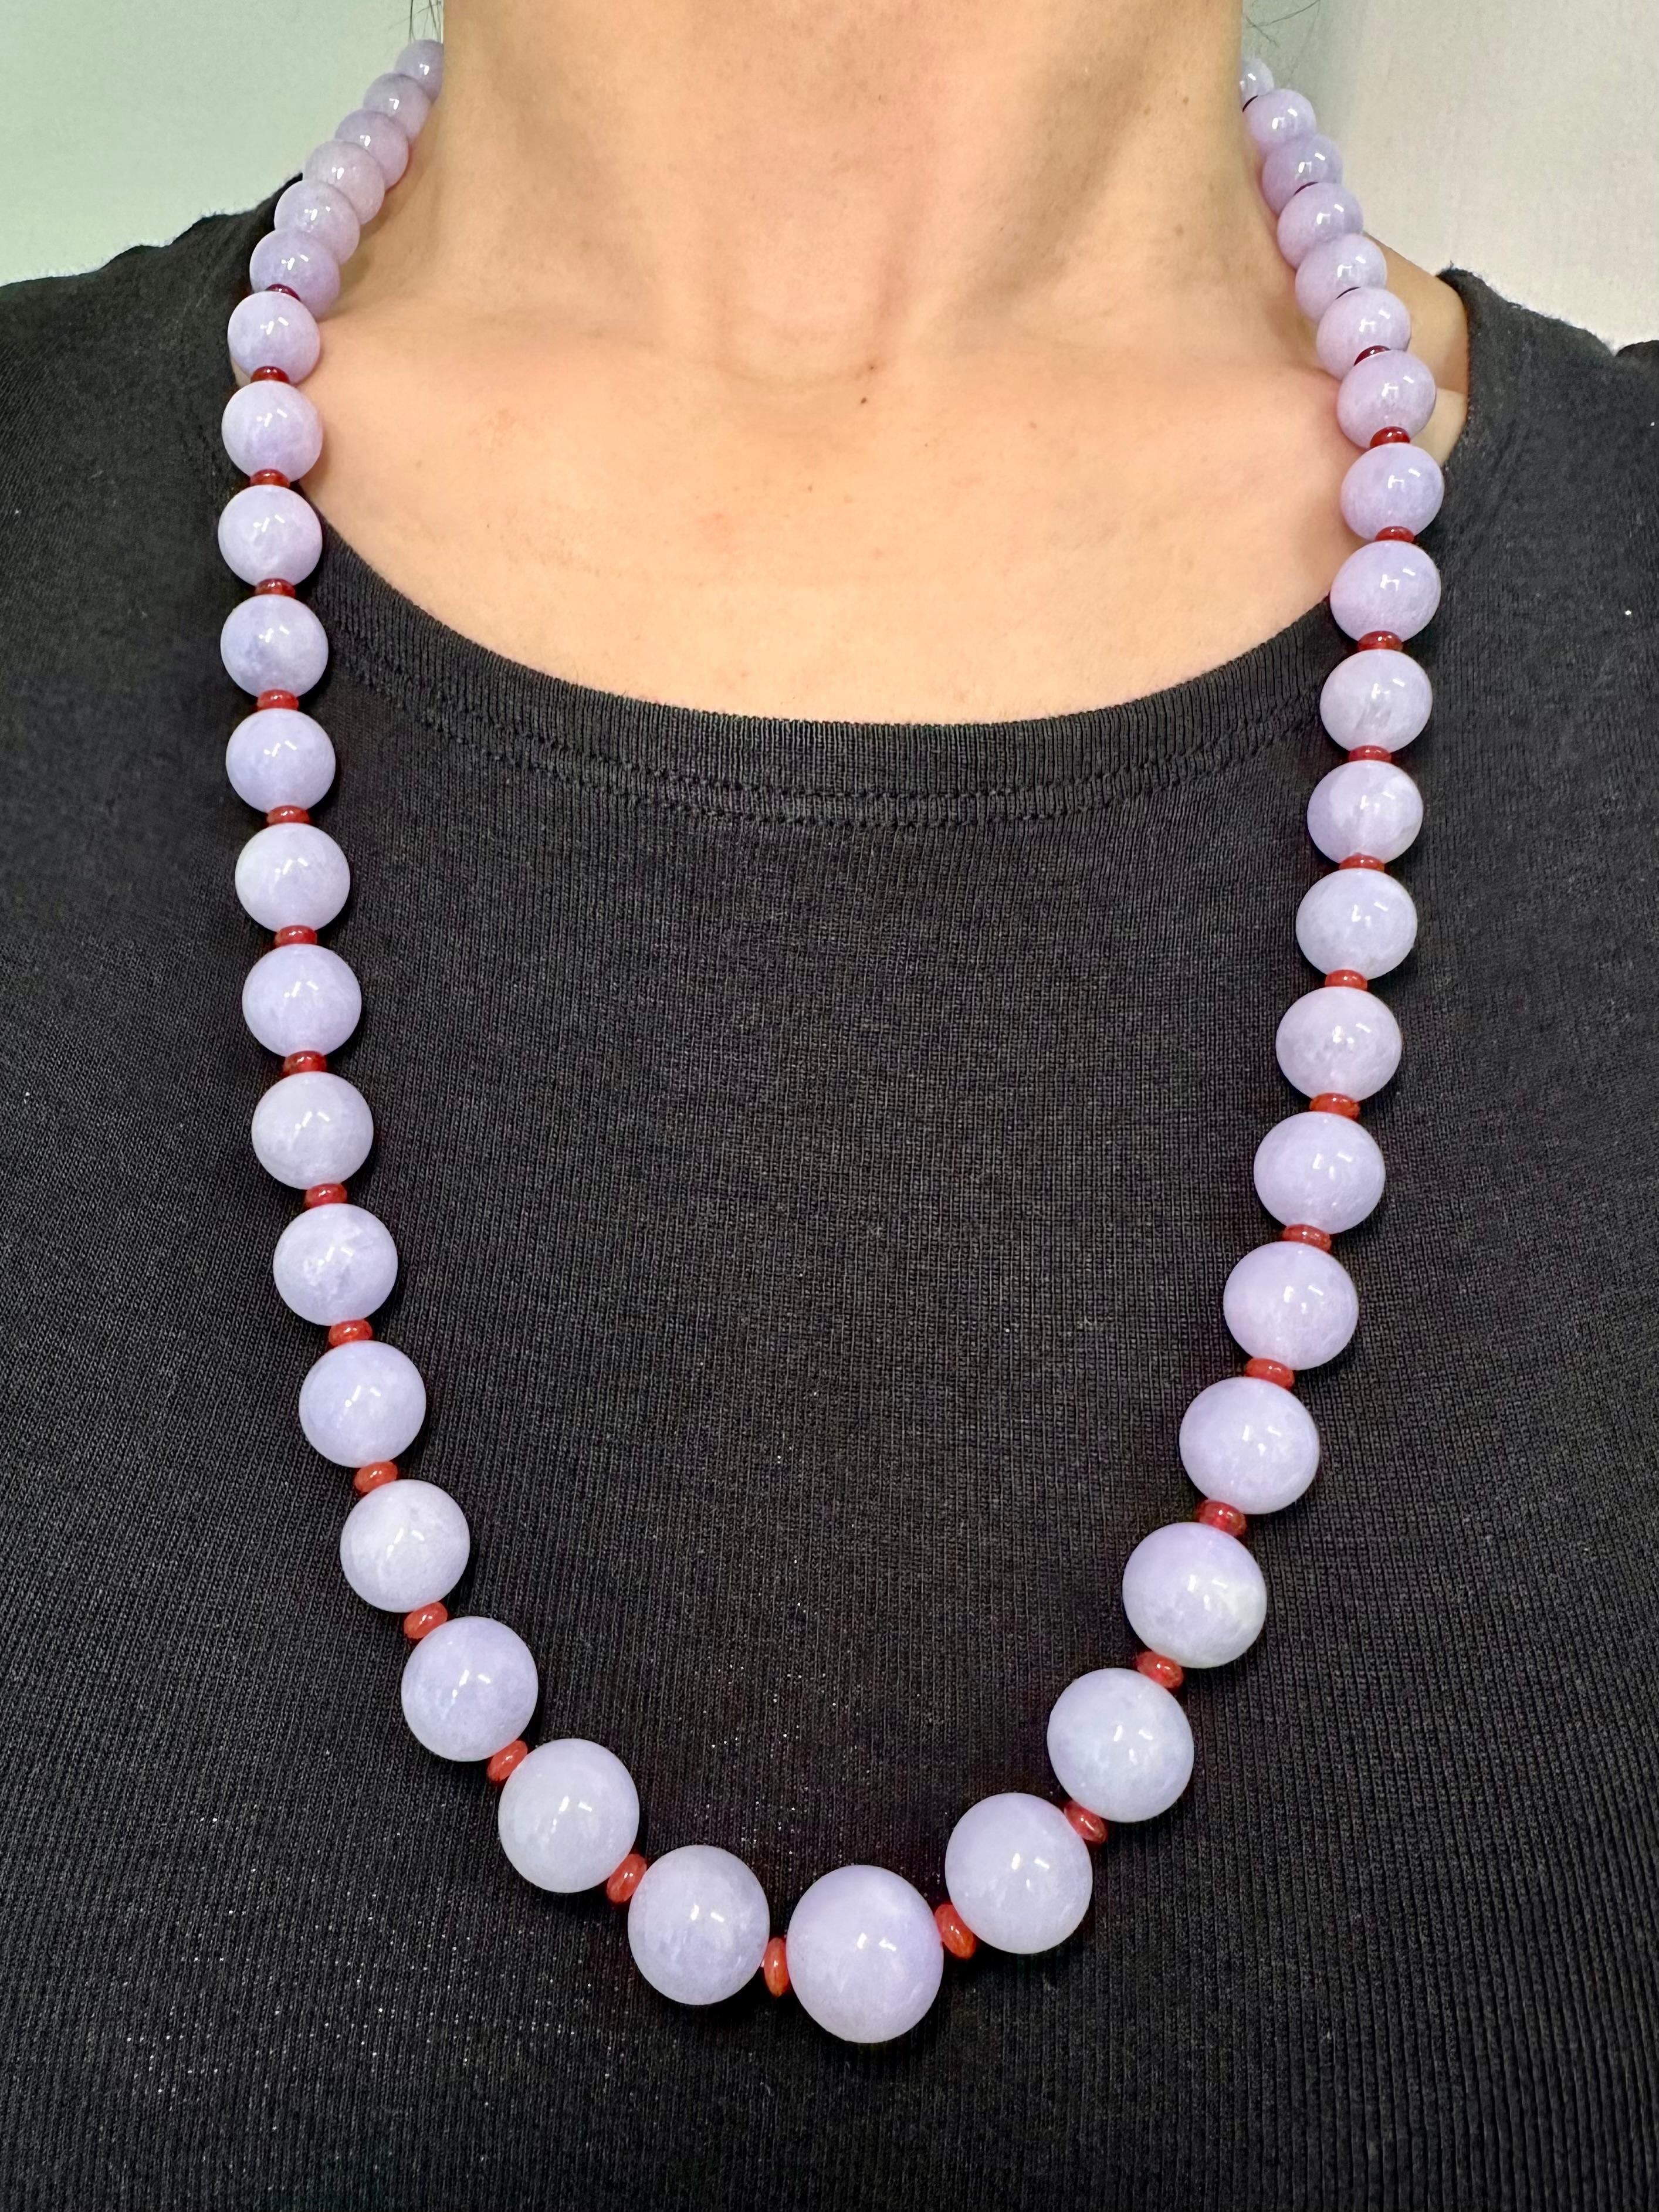 Please check out the HD video! For your consideration is an important natural lavender jade and diamond necklace. Natural Lavender jade beads of this color are rare and not often seen. There are 49 jade beads ranging from about 9.6mm - 13.5mm in